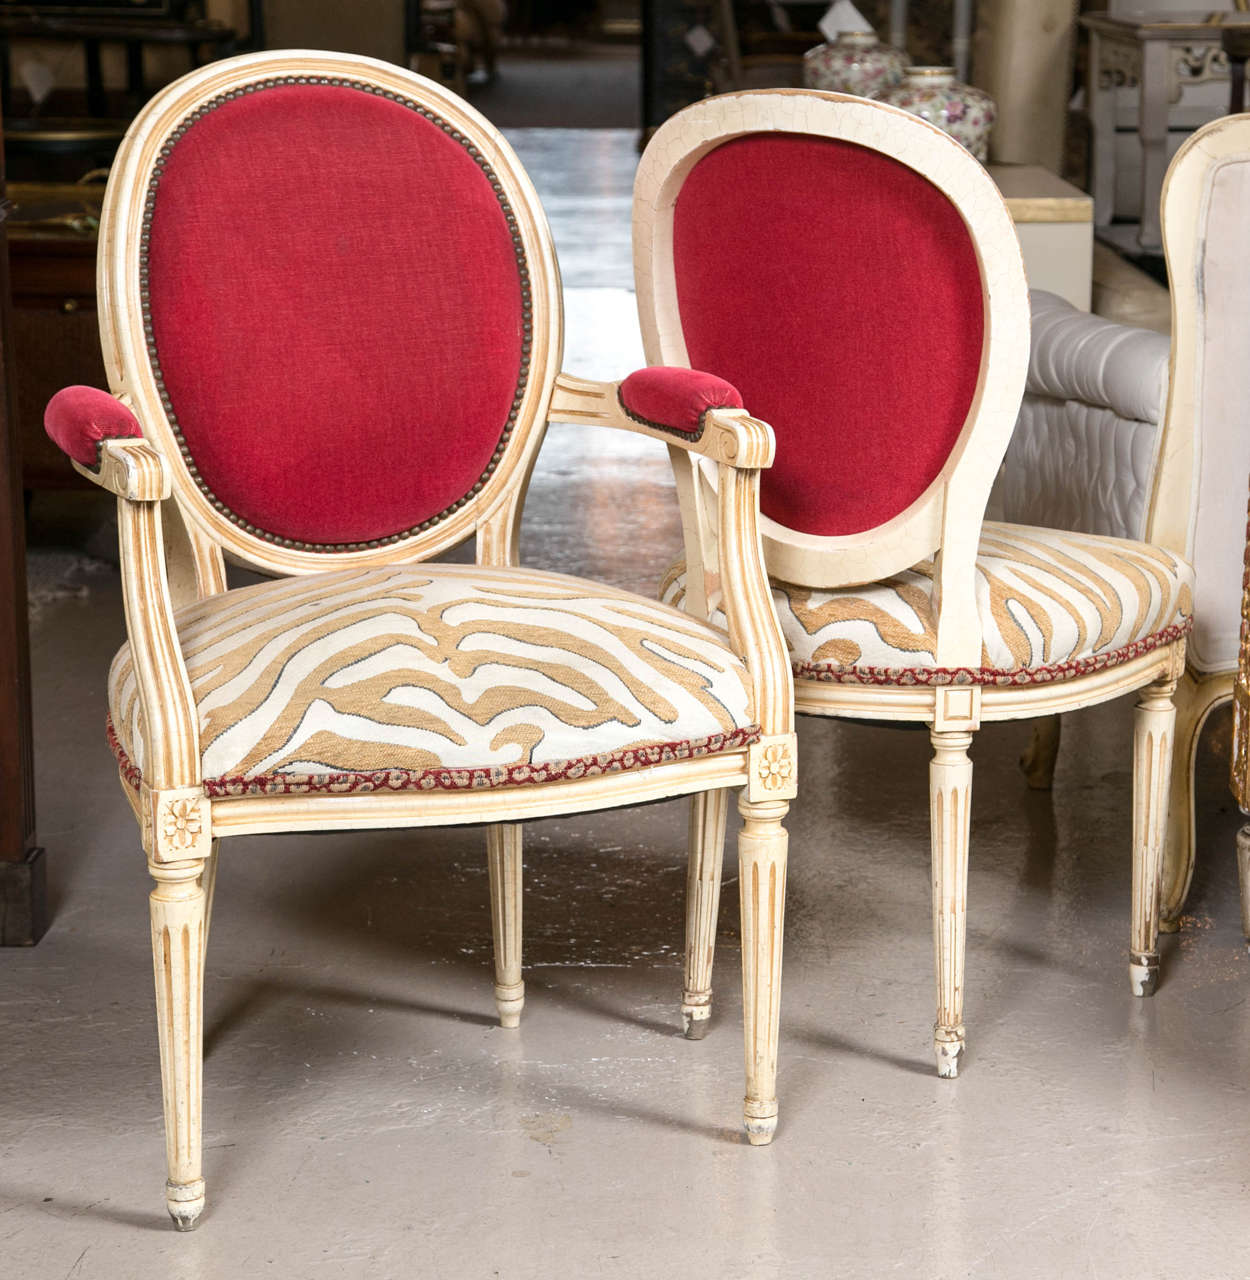 Set of eight Hollywood Regency style French dining chairs. These eight chairs are truly unique accentuating the albino zebra print on the seat and the red upholstery on the top of the back rests and arm rests adds an exciting contract to these Louis